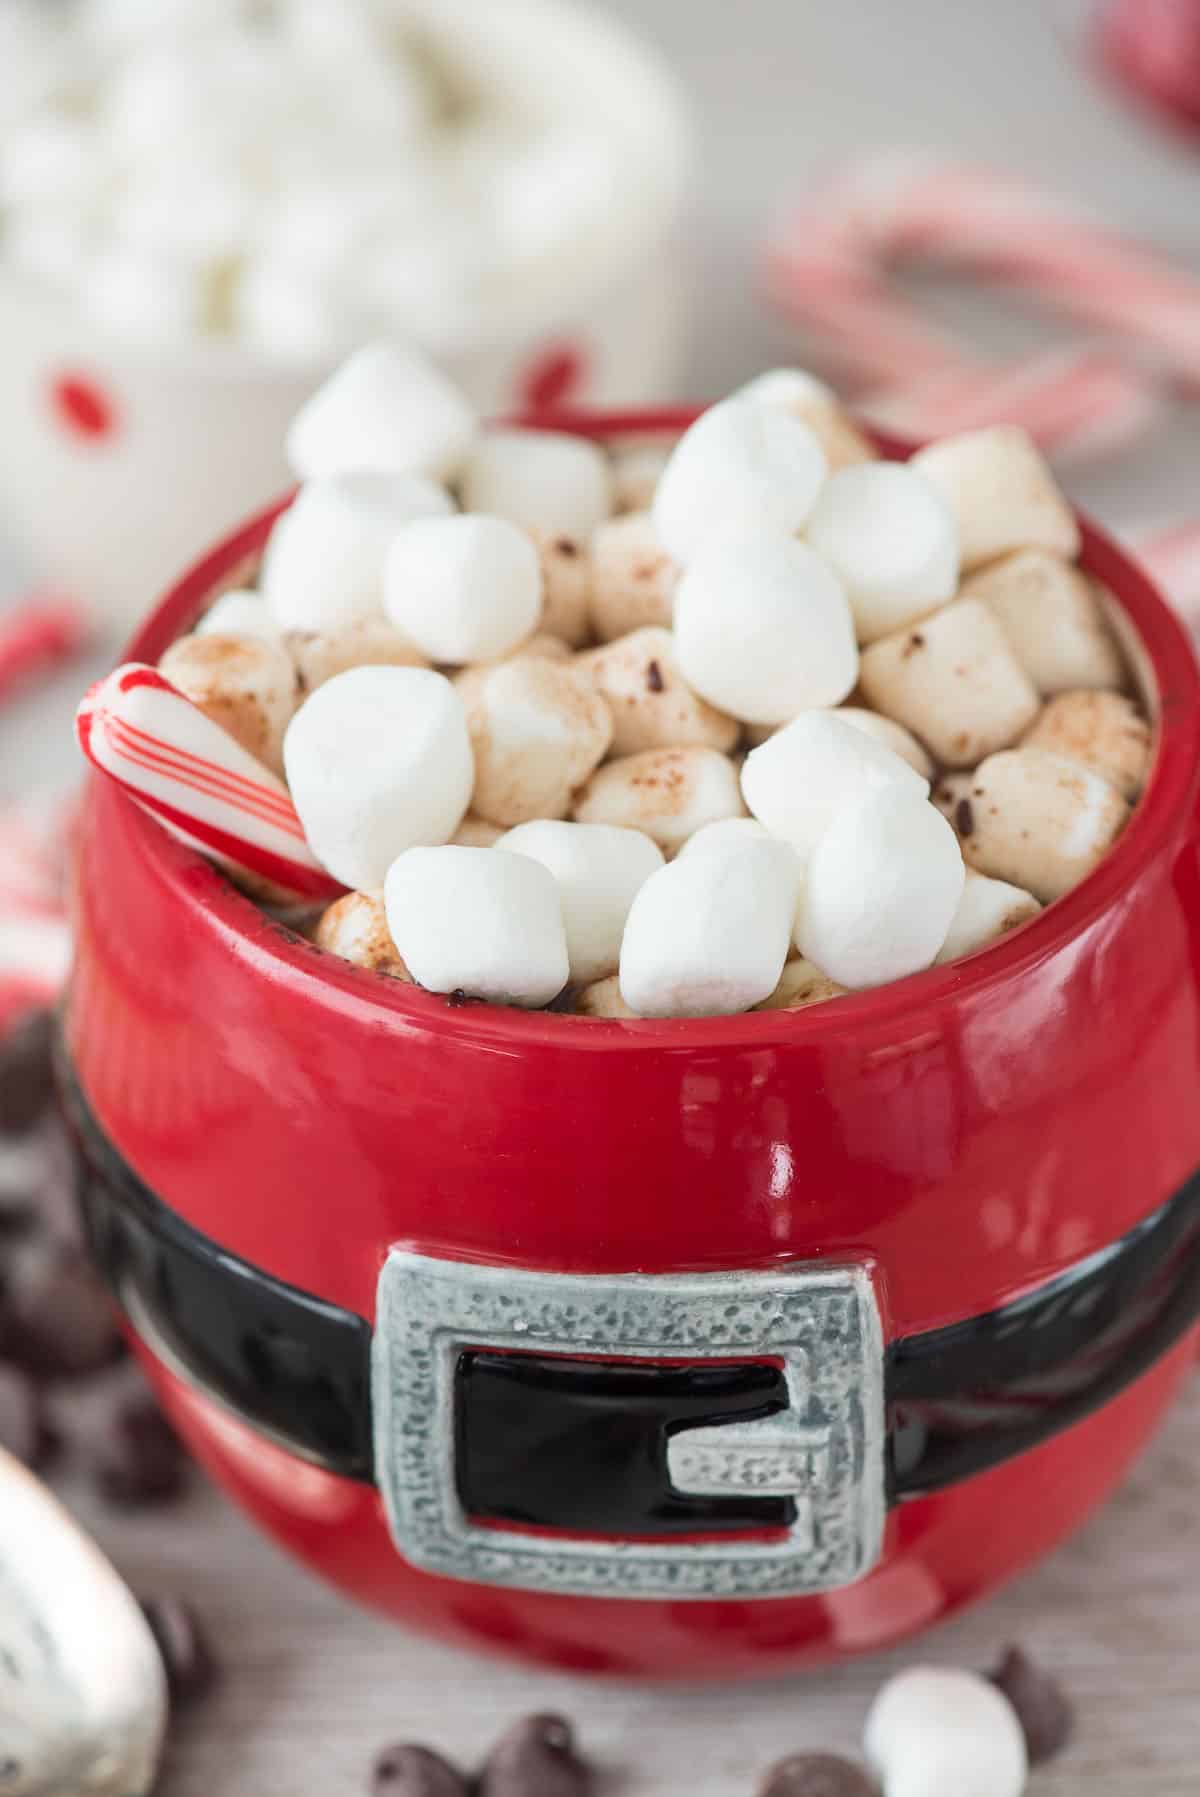 chocolate milk in a Santa Claus cup with marshmallows on top